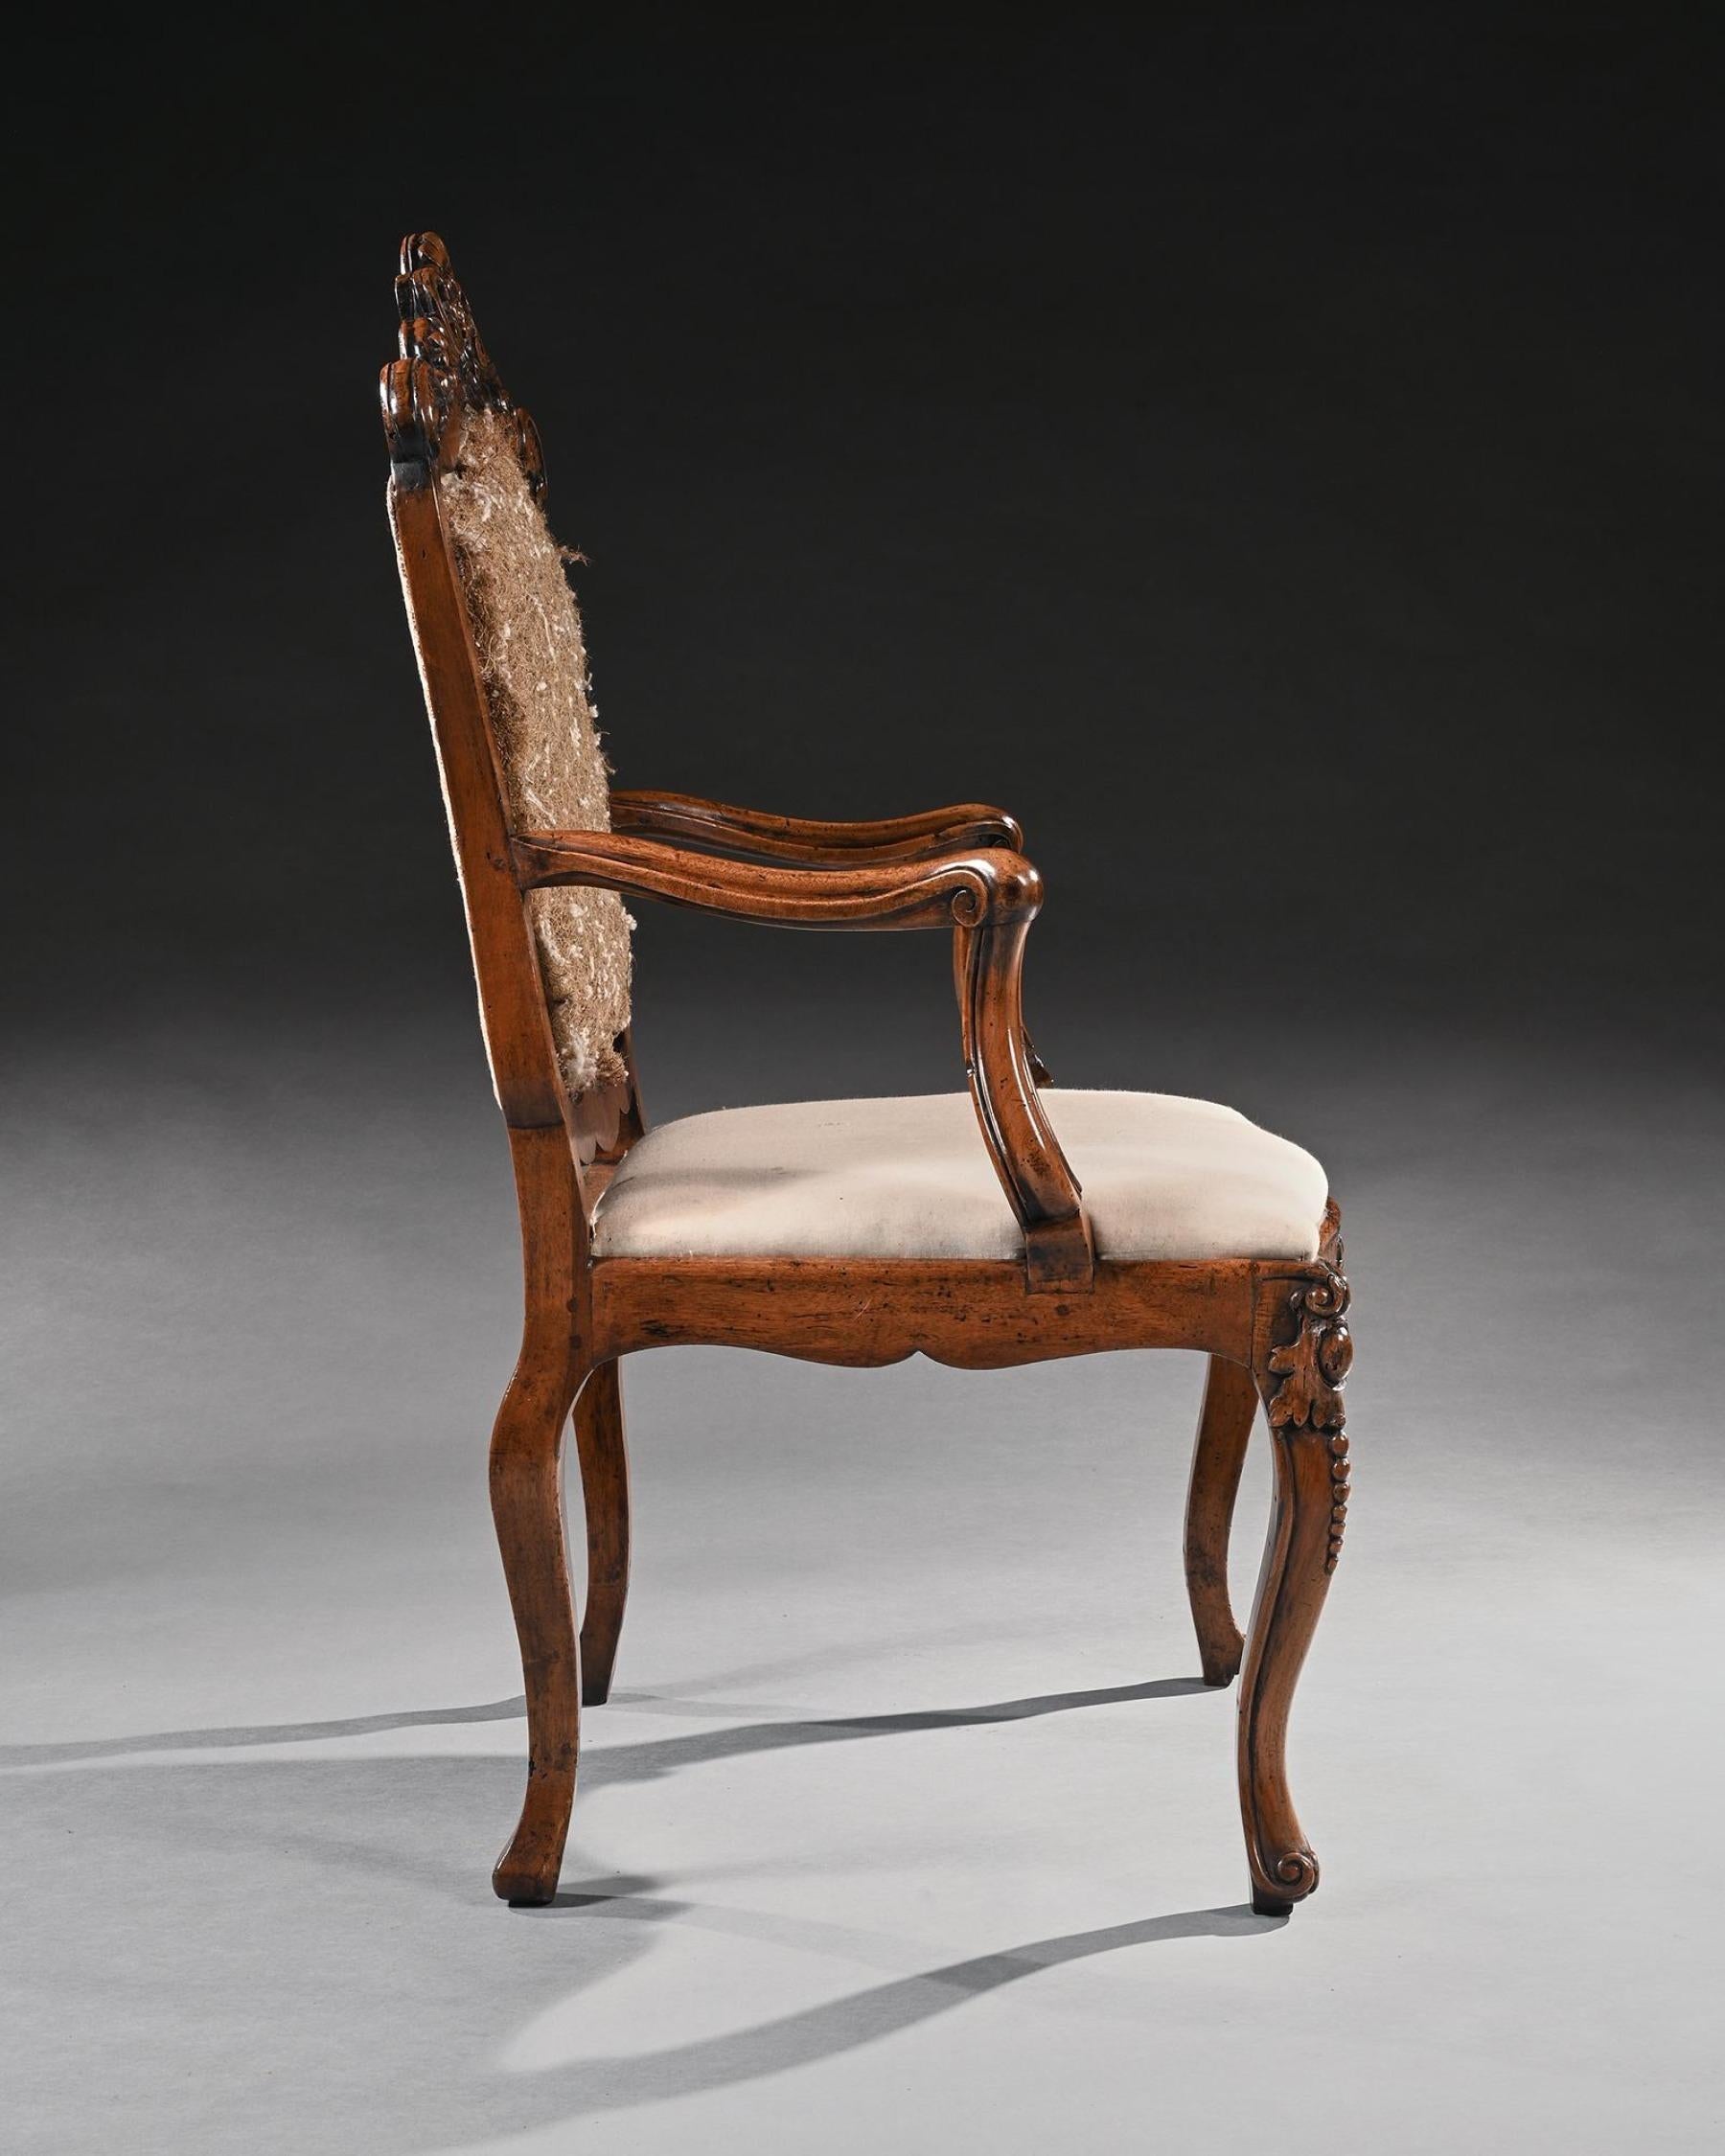 Mid 18th Century Italian Rococo Armchair in Walnut With Extravagantly Carved In Good Condition For Sale In Benington, Herts